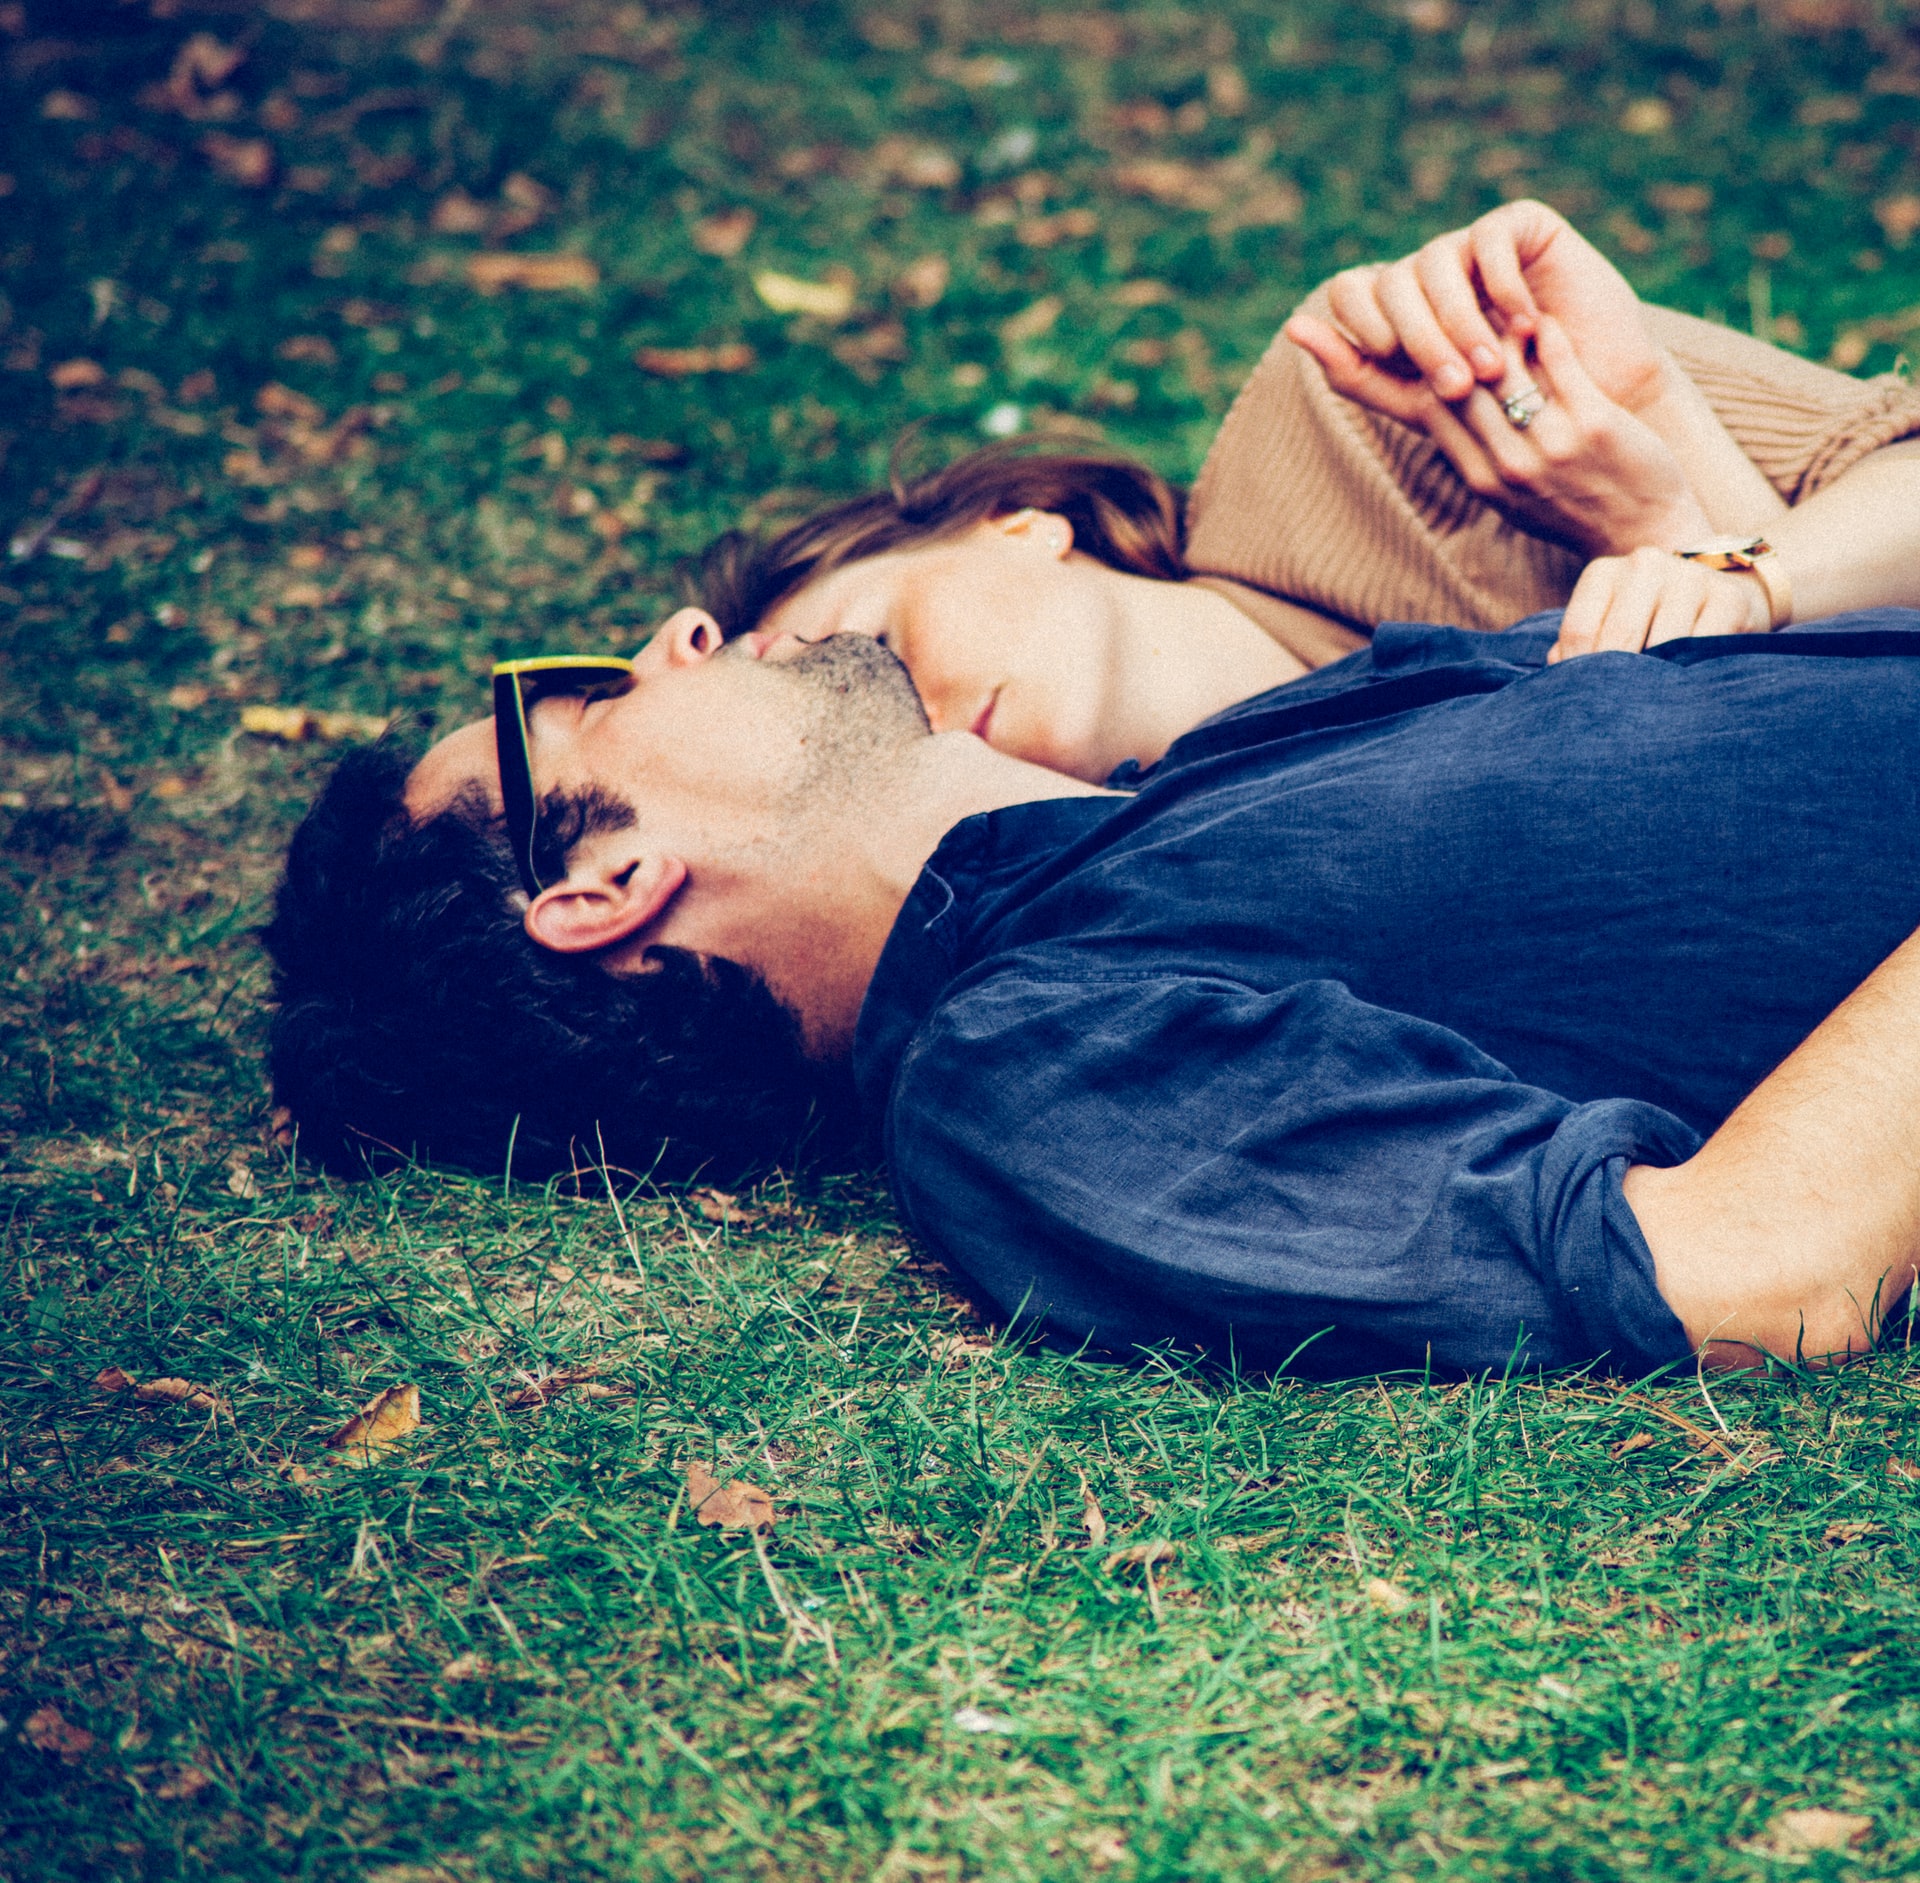 second date ideas that include couple lying around romantically